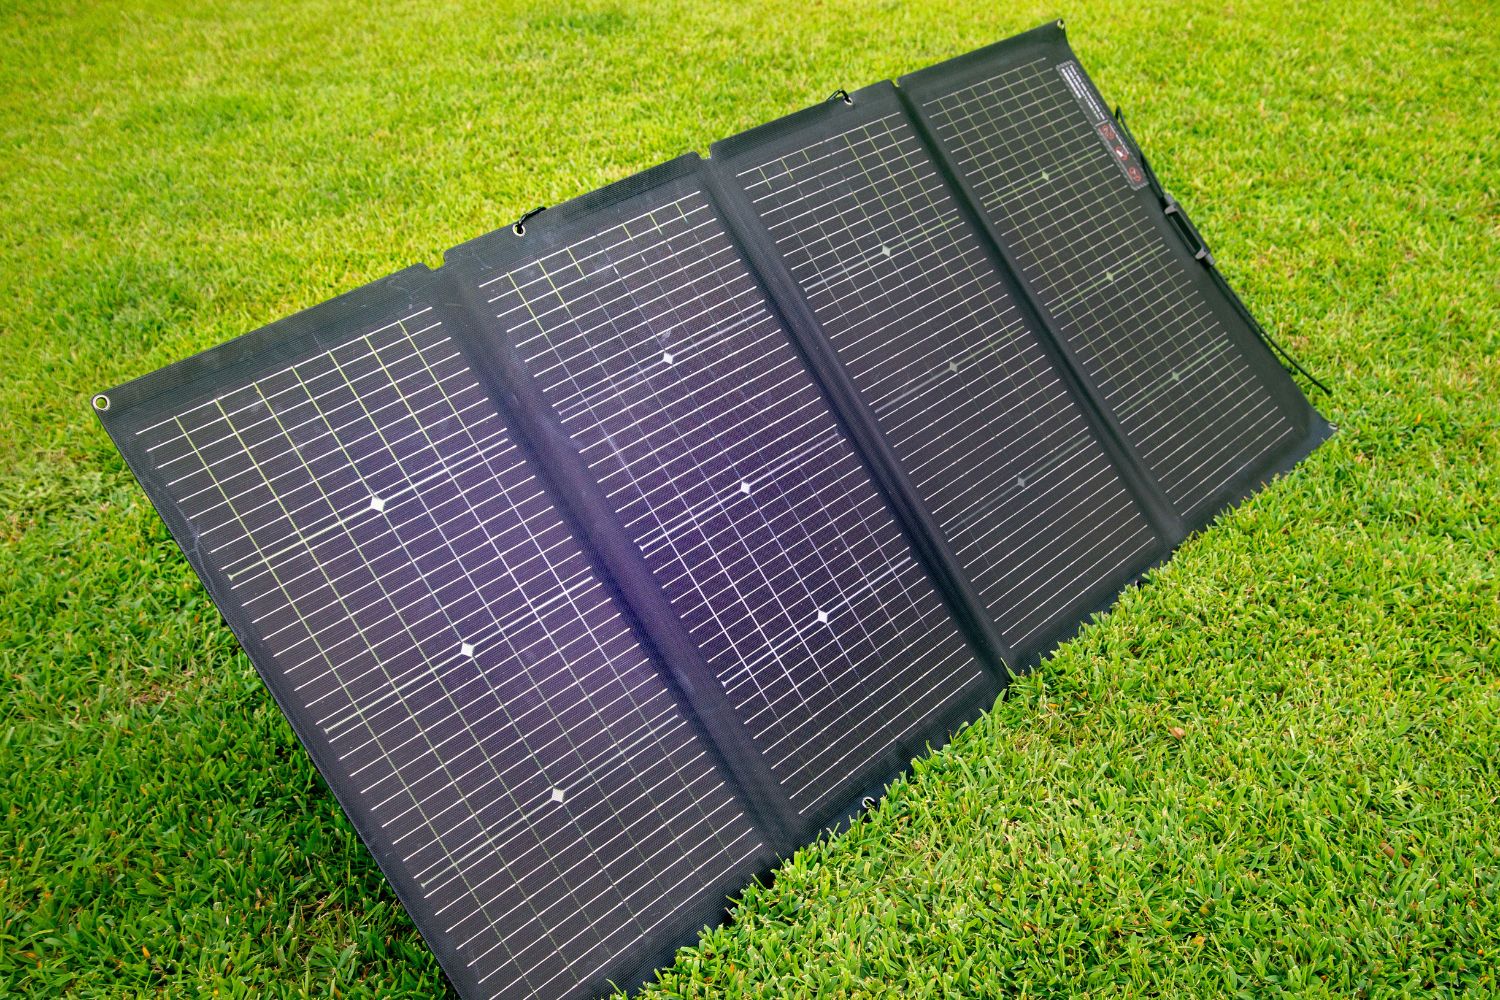 The solar panel of the EcoFlow Delta 2 Max solar generator set up in a yard